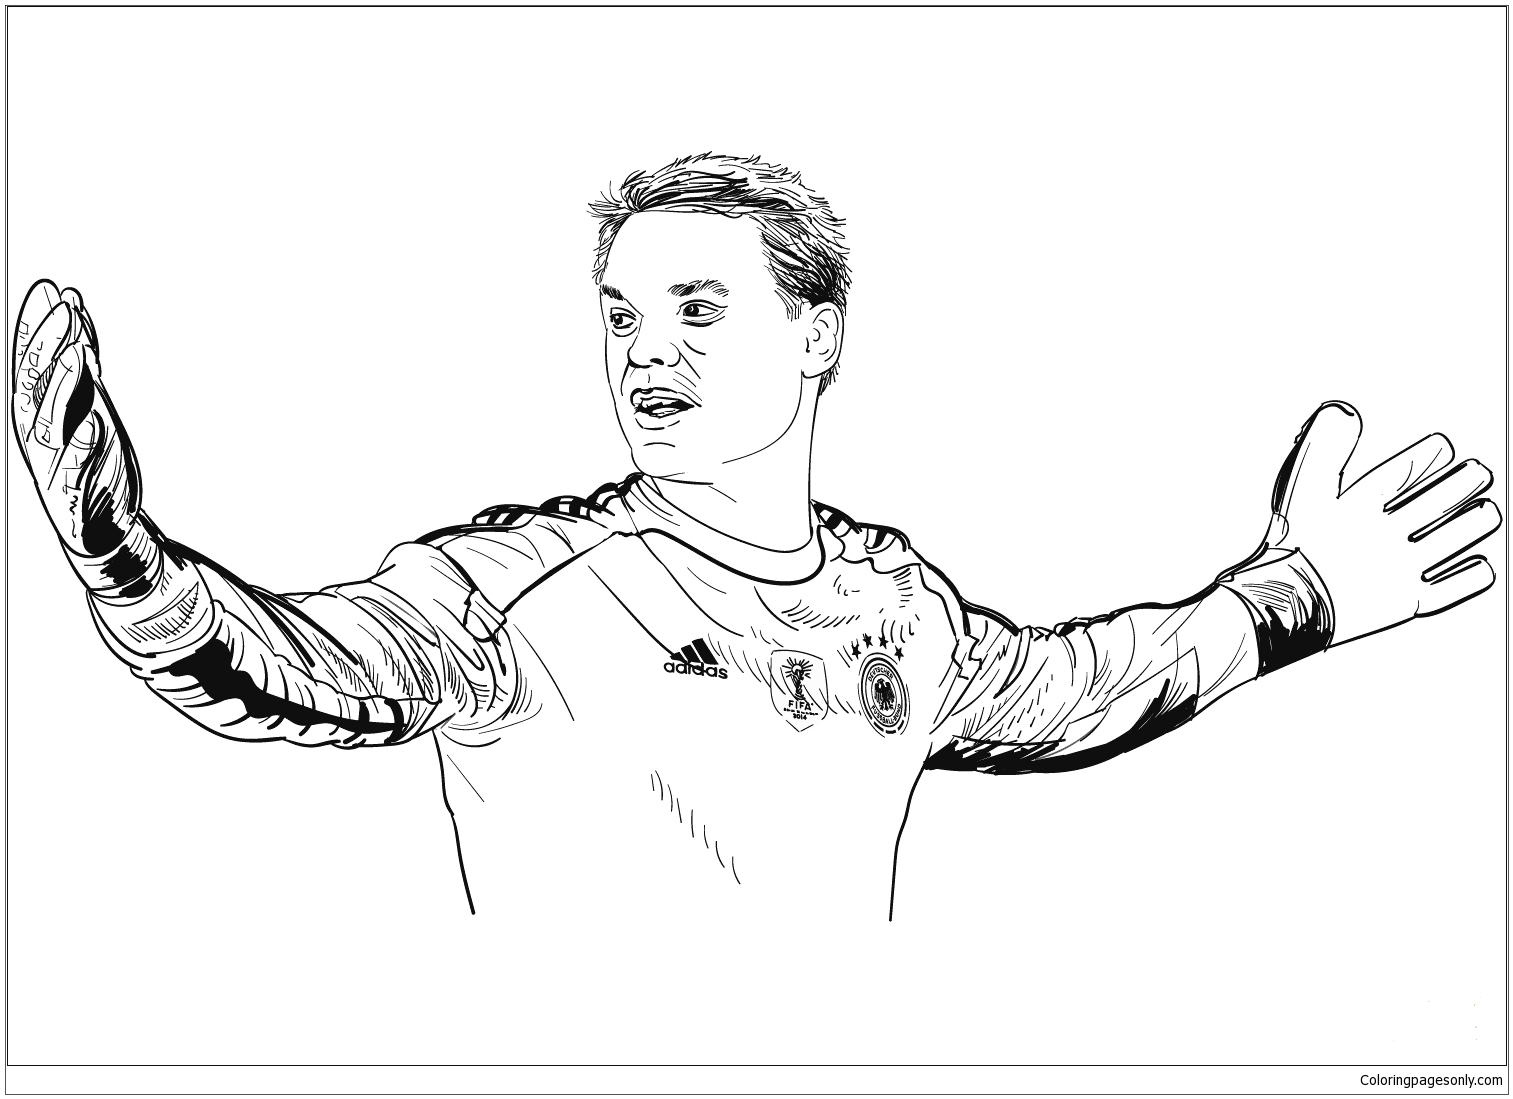 Manuel Neuer-image 1 Coloring Page